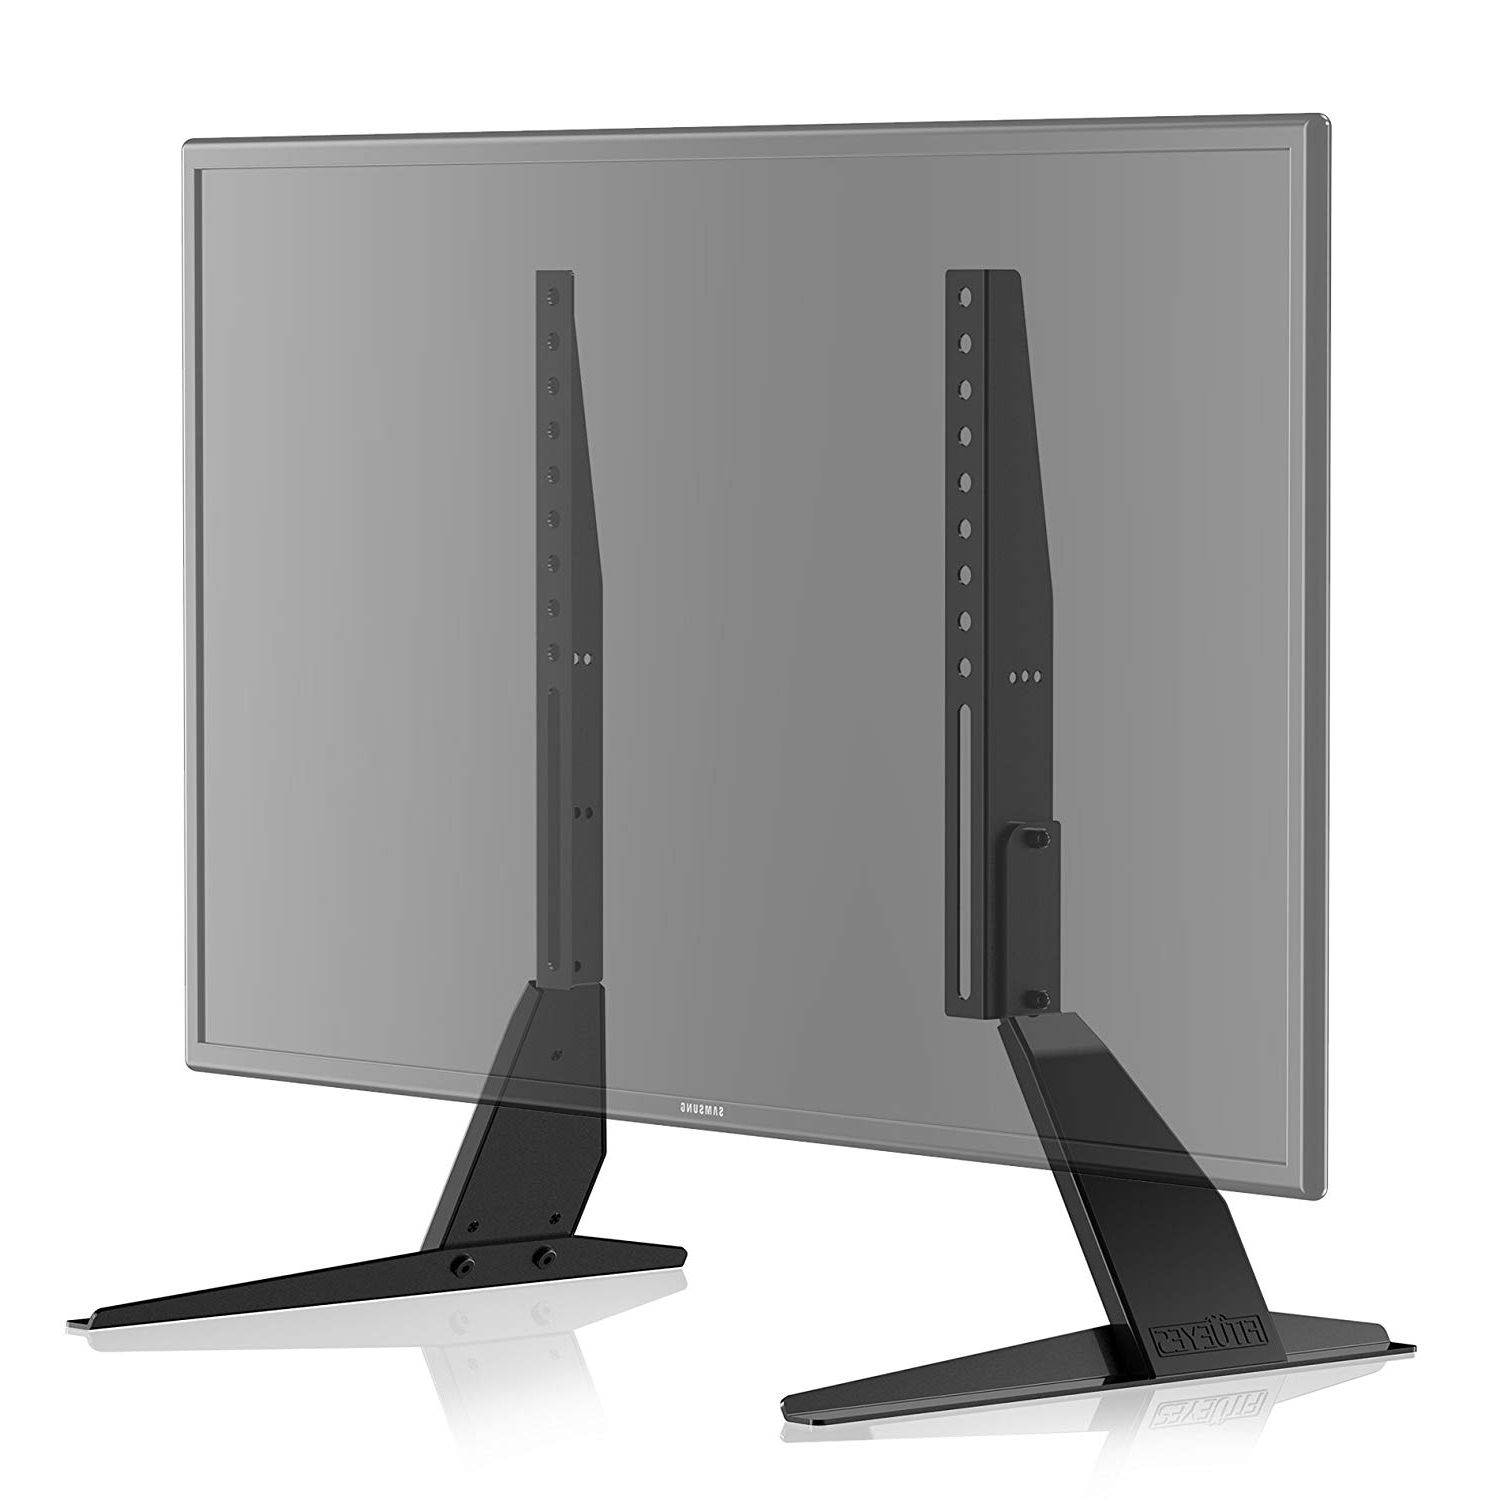 2017 Vizio 24 Inch Tv Stands Pertaining To Amazon: Fitueyes Universal Lcd Flat Screen Tv Table Top Stand (View 4 of 20)